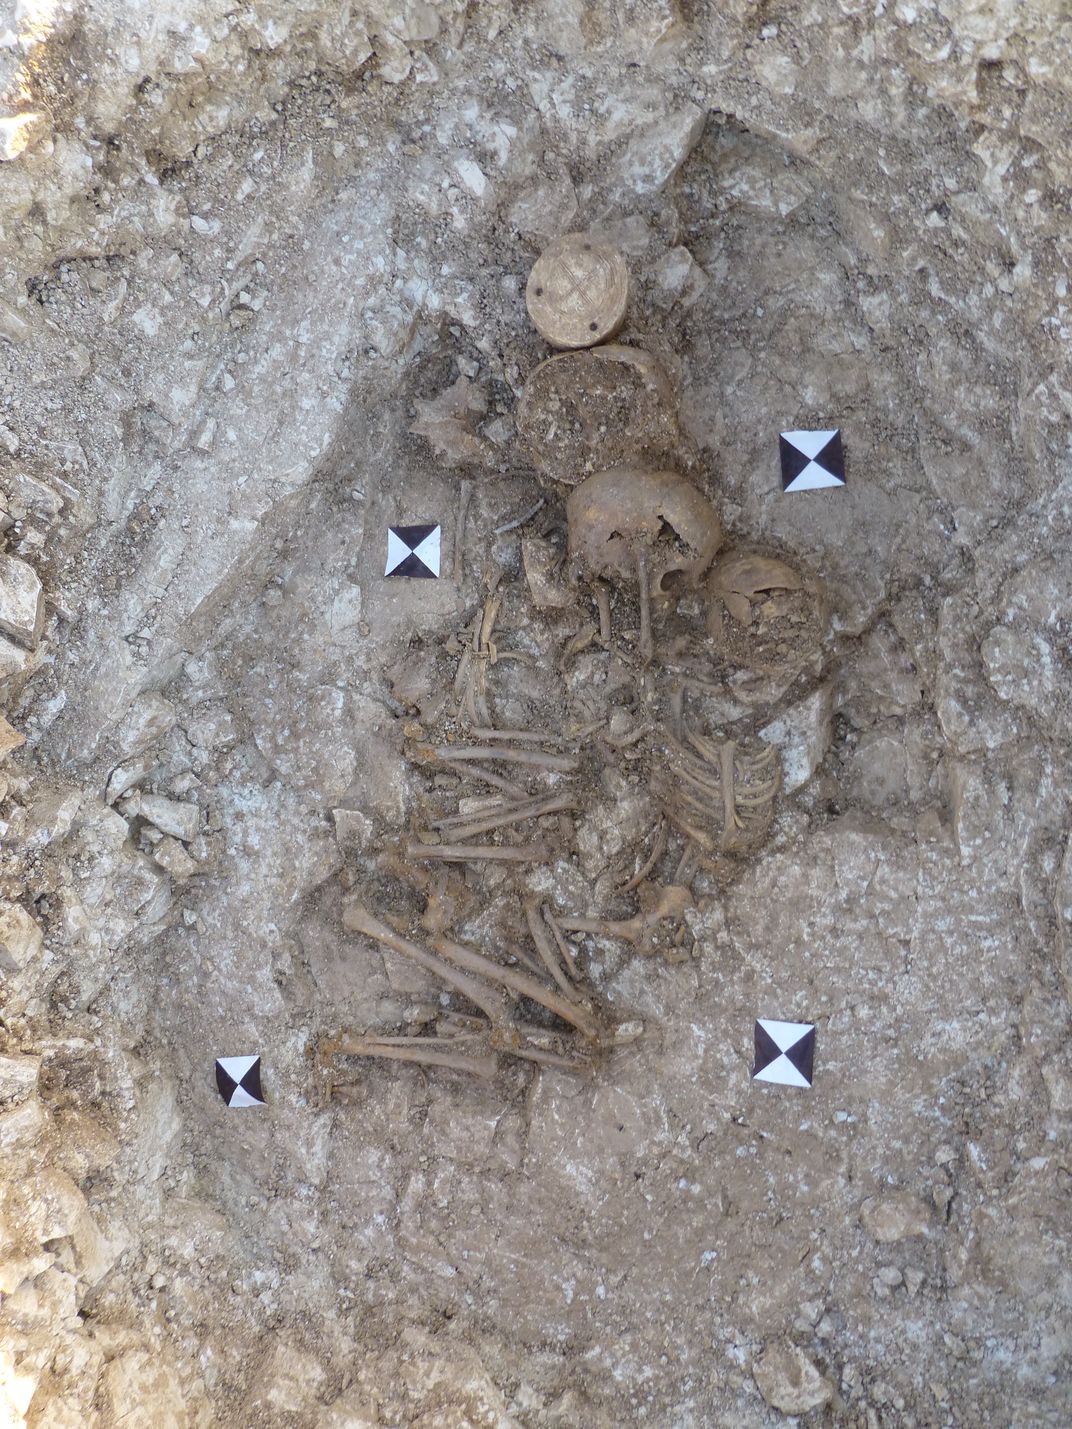 skeletal remains of children embracing each other